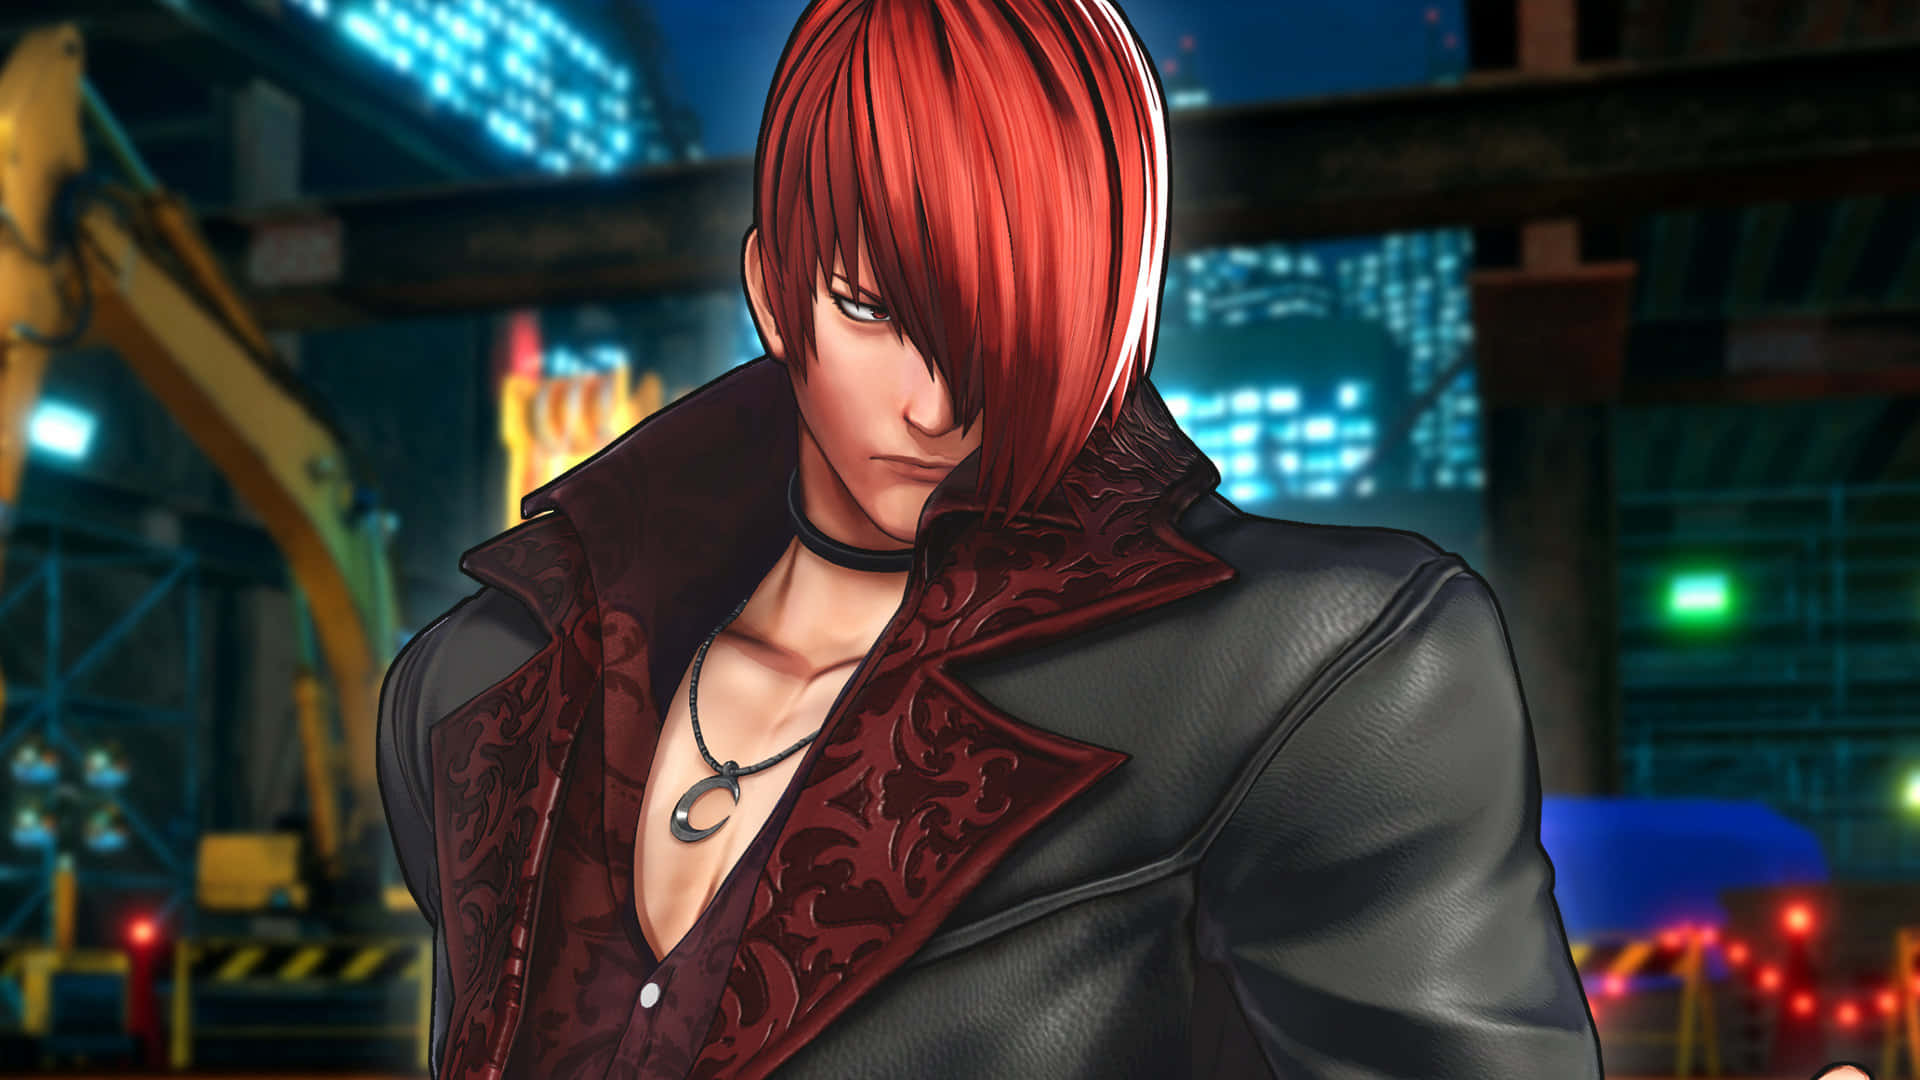 A Character In A Video Game With Red Hair Wallpaper